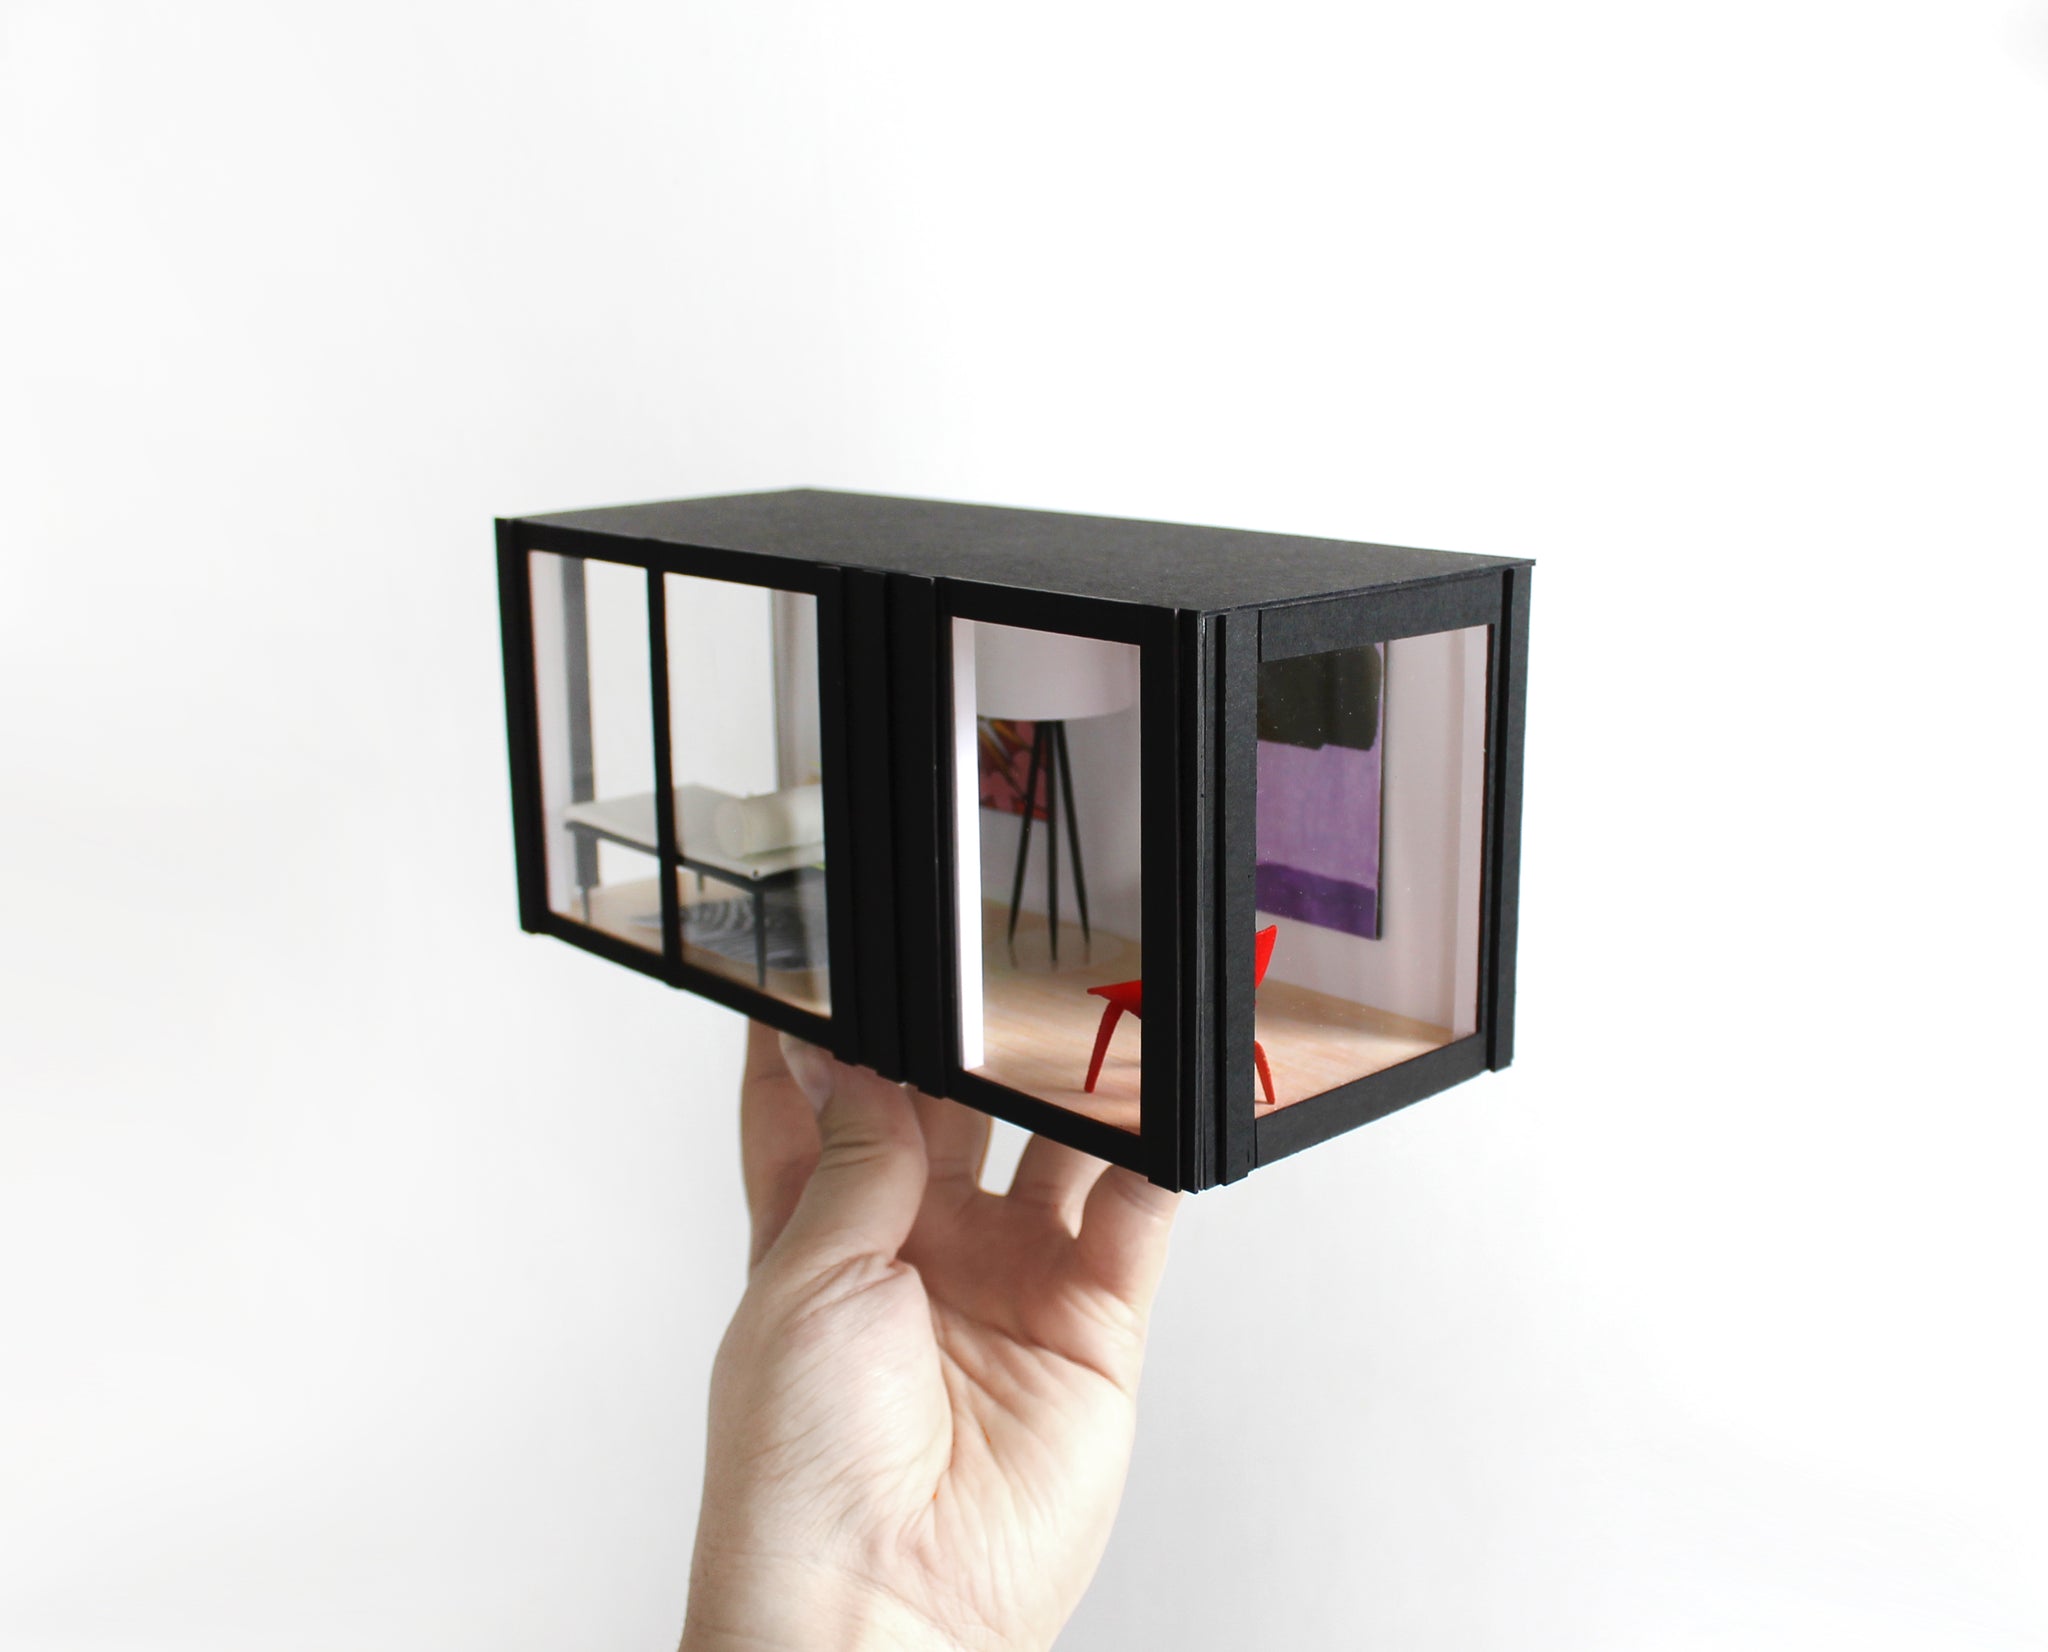 Shipping Container House in half inch scale